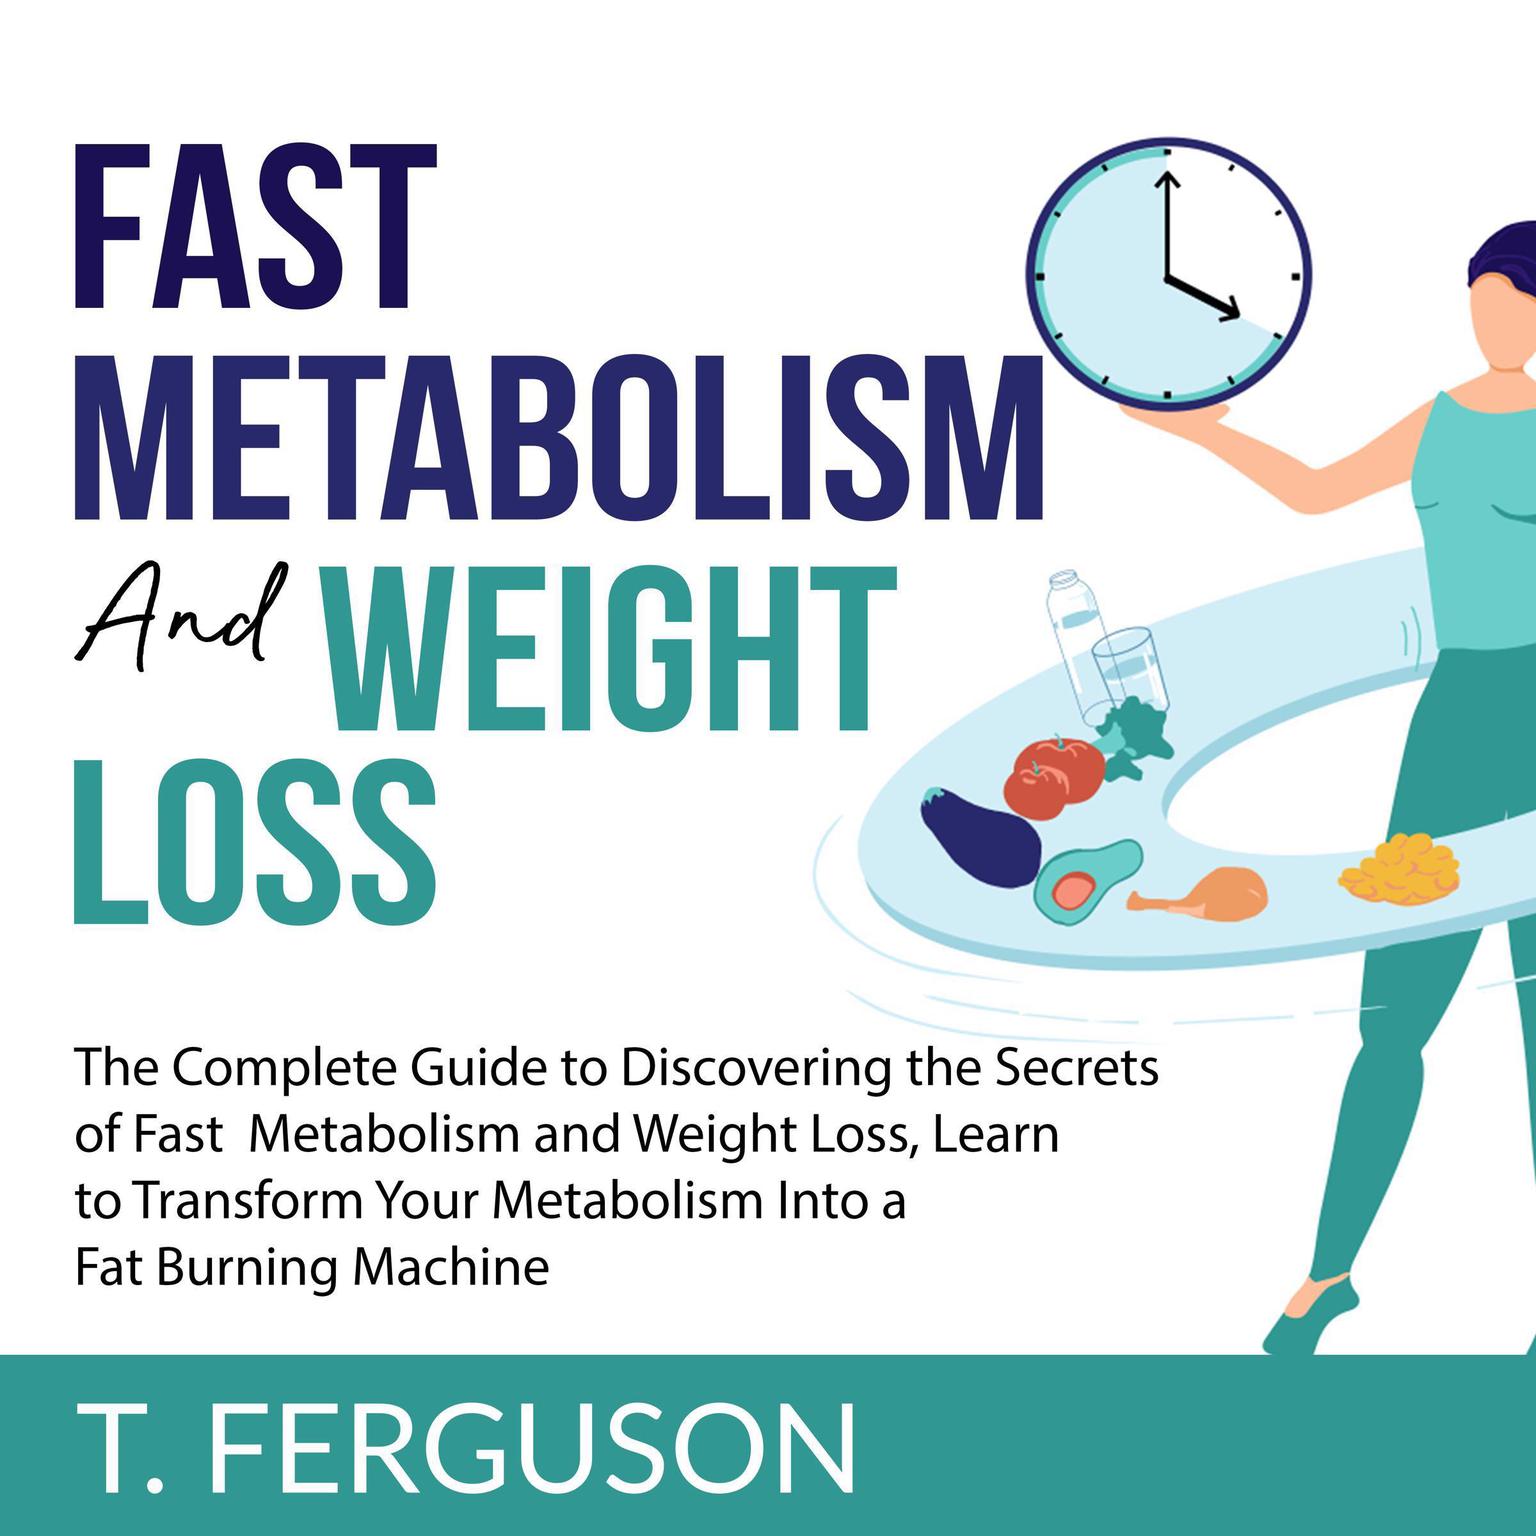 Fast Metabolism and Weight Loss: The Complete Guide to Discovering the Secrets of Fast Metabolism and Weight Loss, Learn to Transform Your Metabolism Into A Fat Burning Machine Audiobook, by T. Ferguson